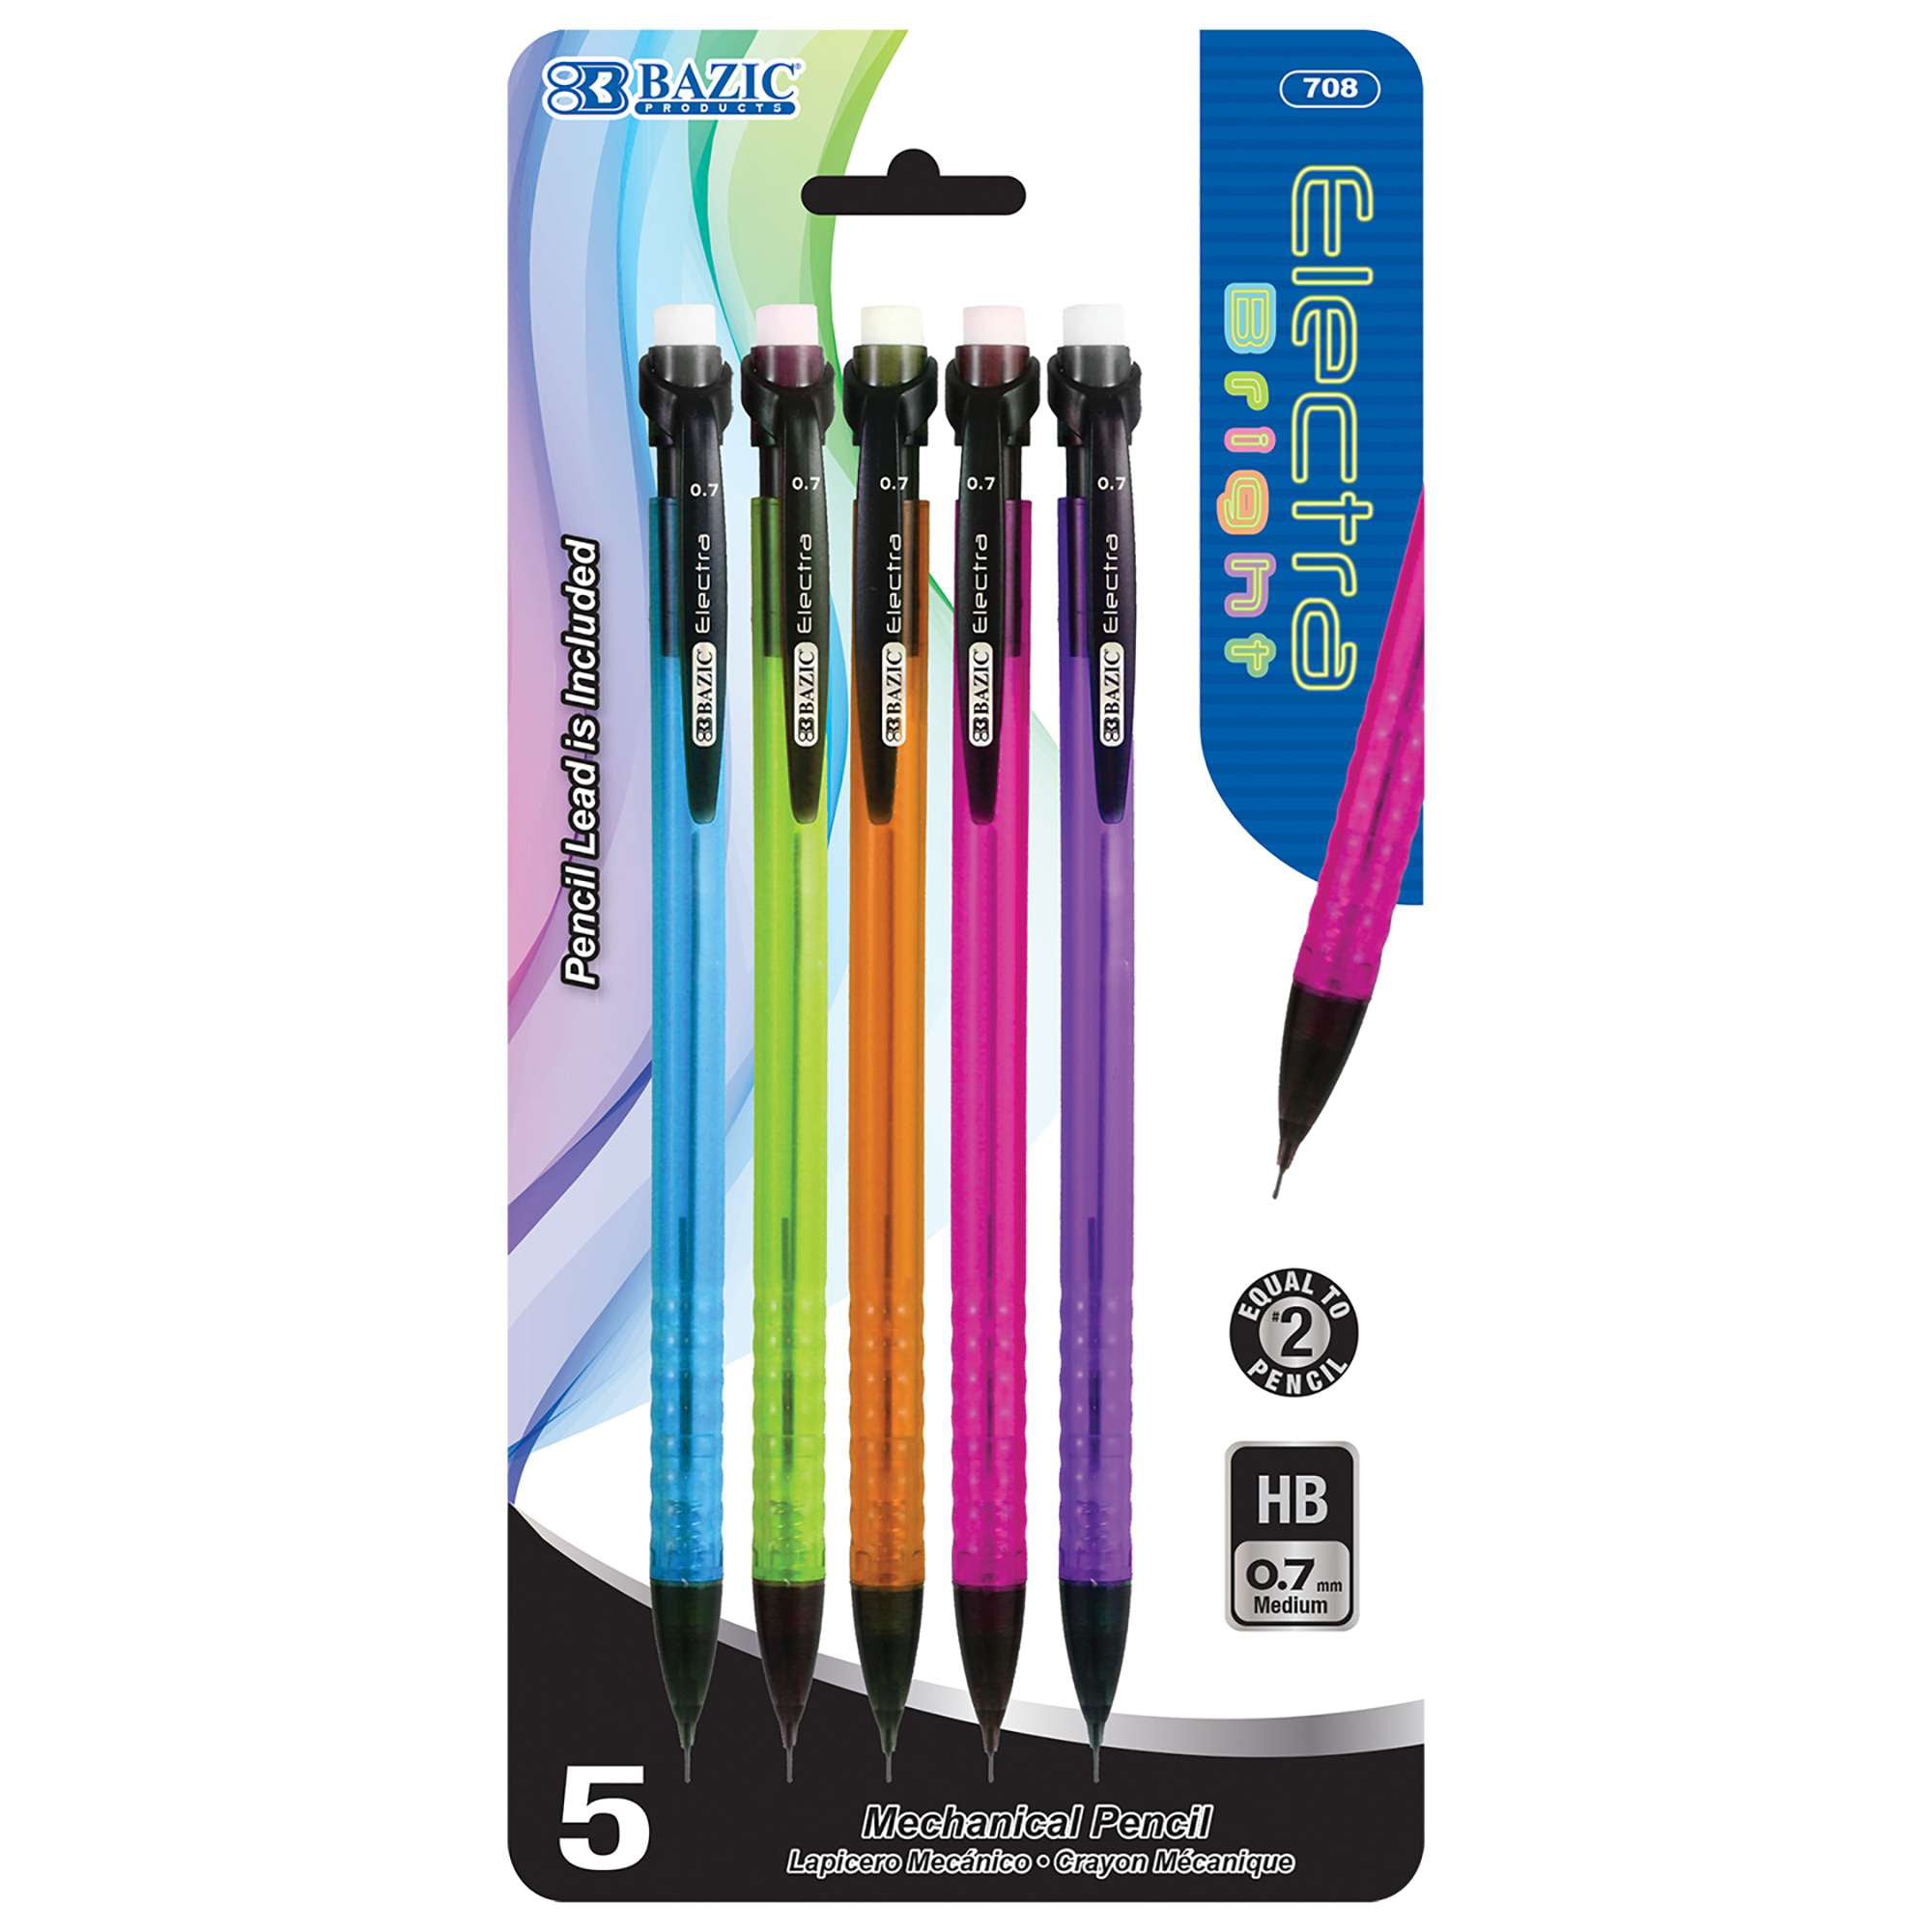 Latex-Free Grip Arteza HB Mechanical Pencil Pack of 20 with 0.7 Millimeter Medium Point Lead and Replaceable Eraser